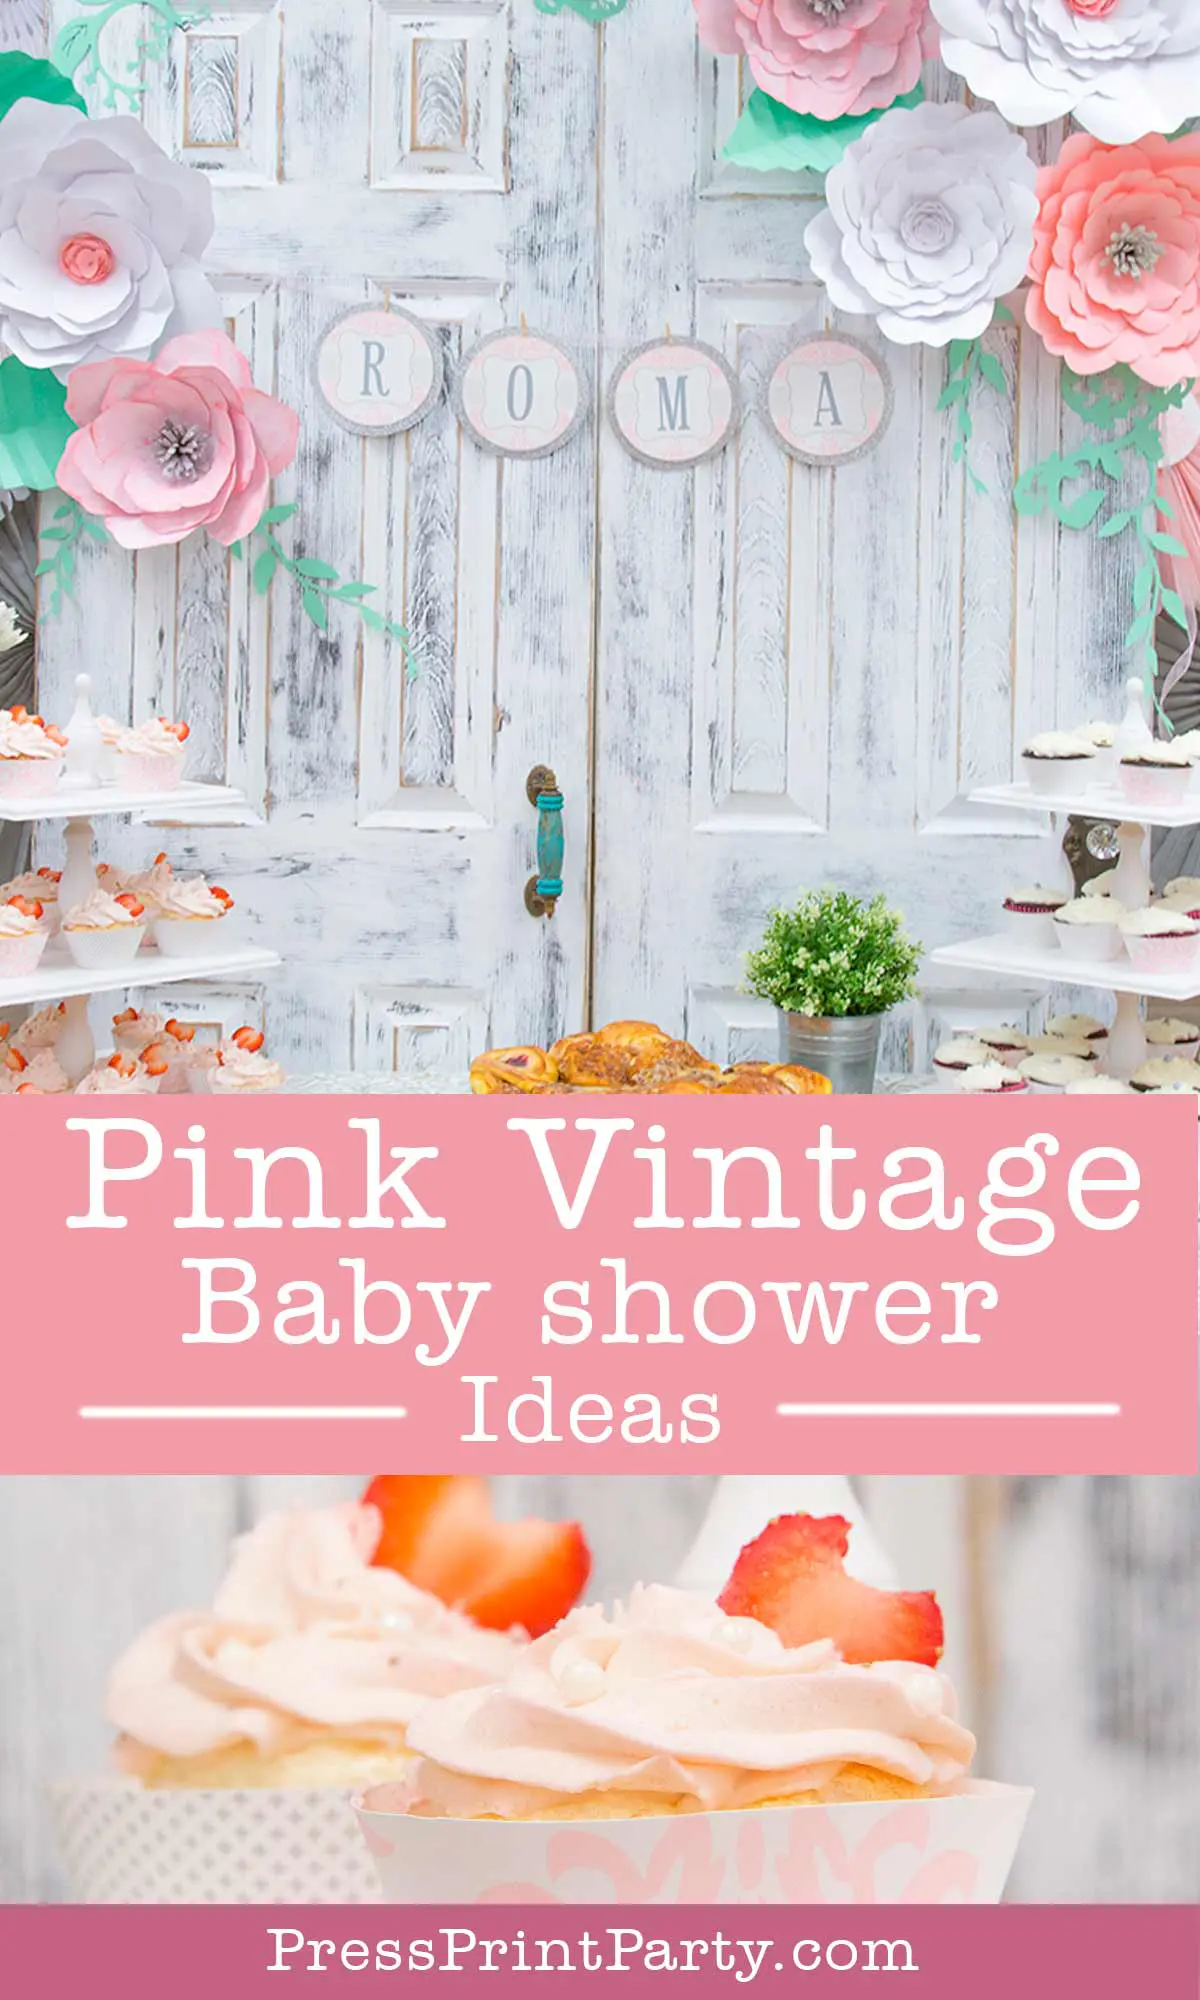 Pink vintage baby shower rustic baby shower ideas - Press Print Party!